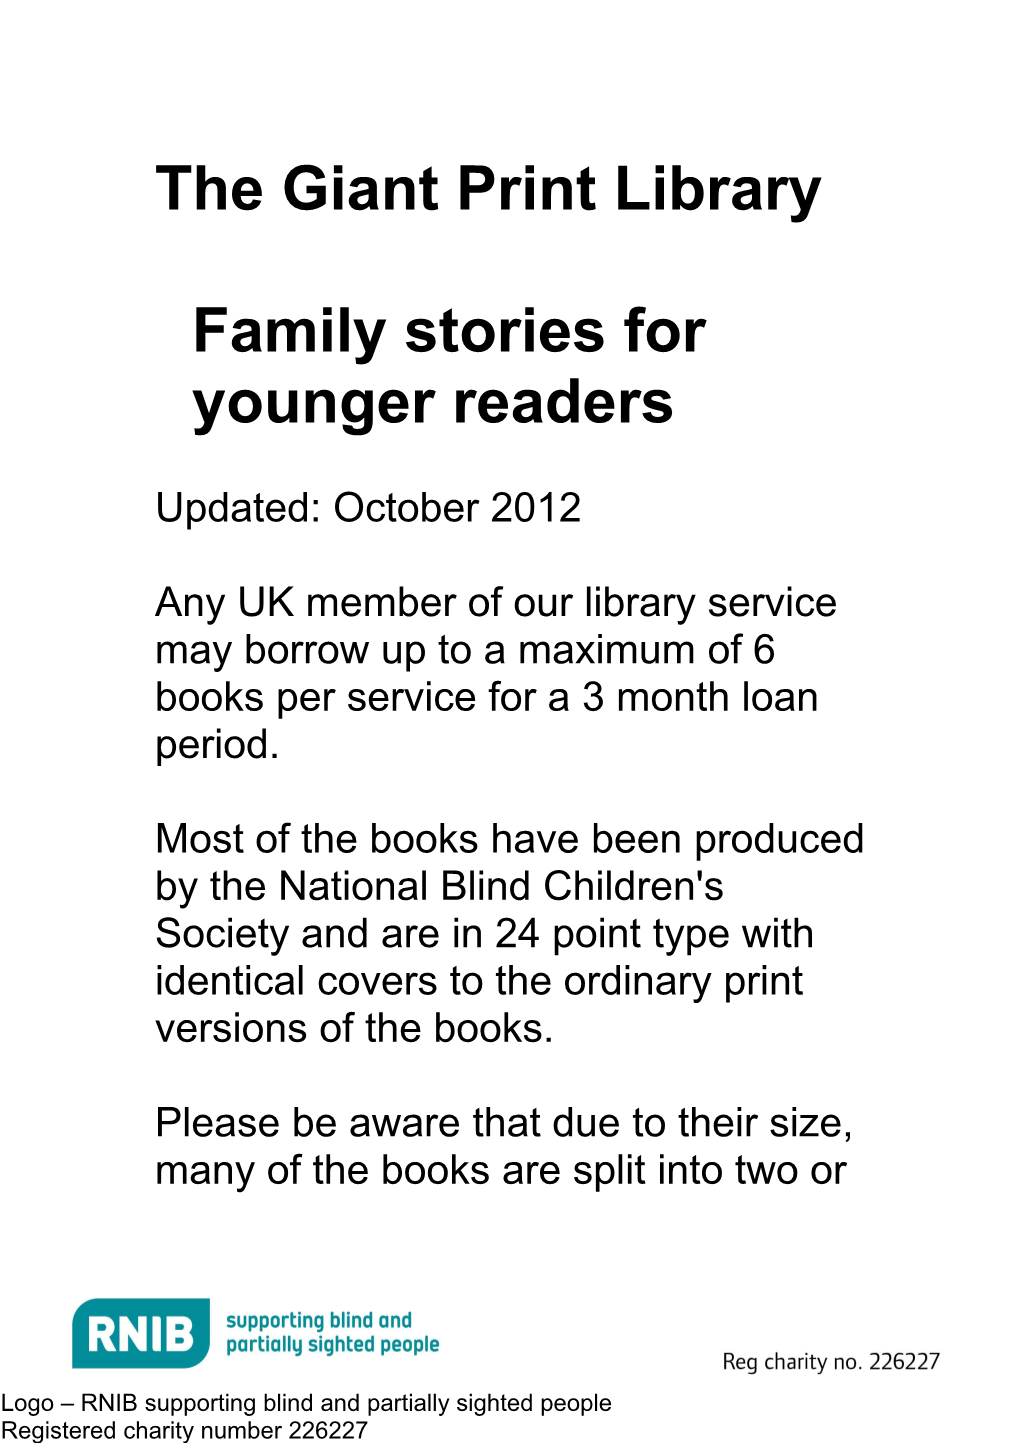 Family Stories for Younger Readers in Giant Print (Word, 200KB)